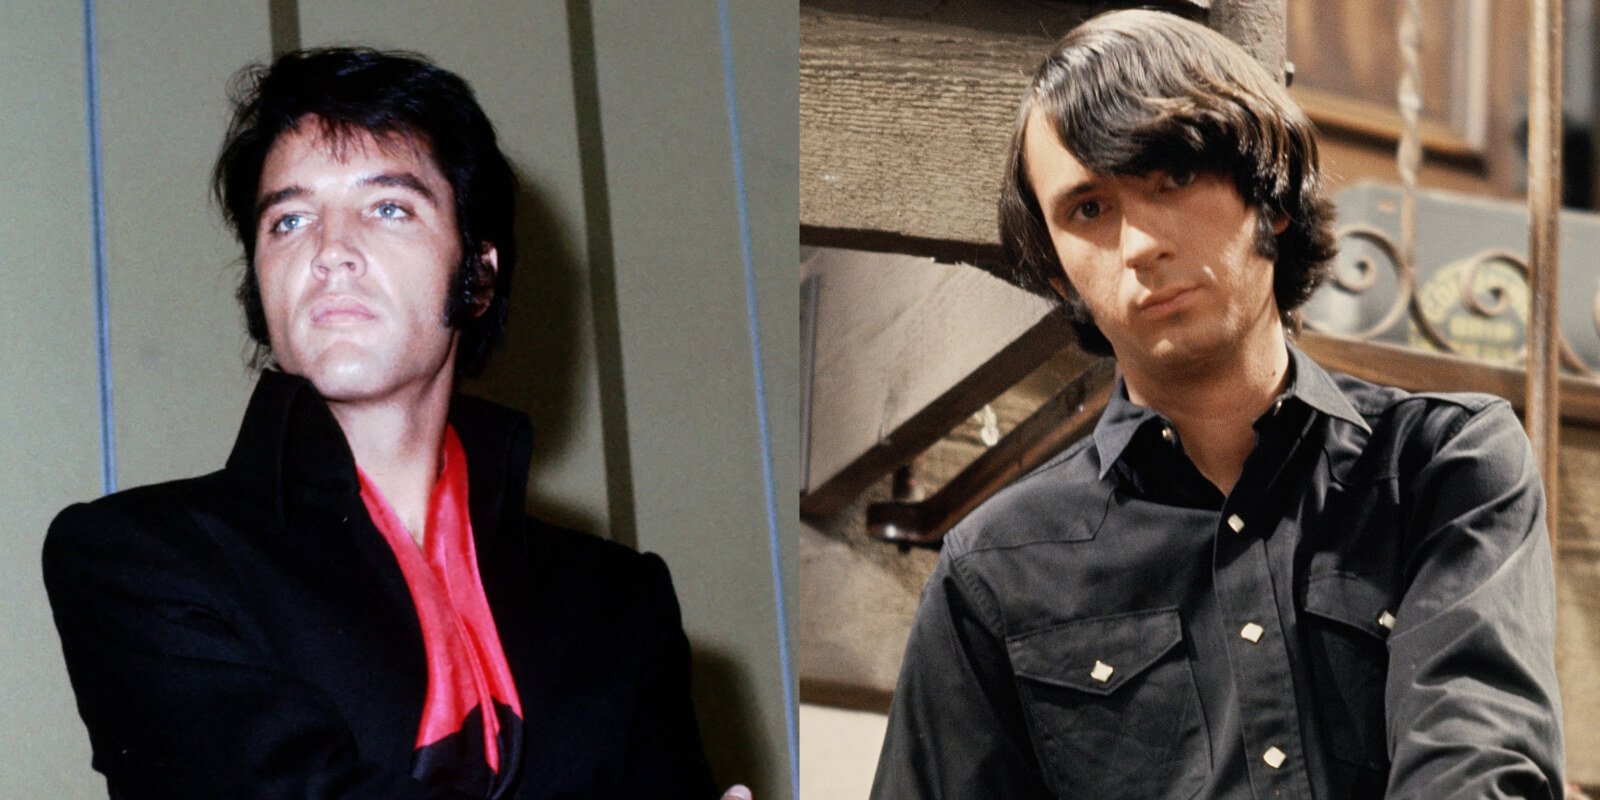 Elvis Presley and Mike Nesmith in side-by-side images, both taken in the 1960s.